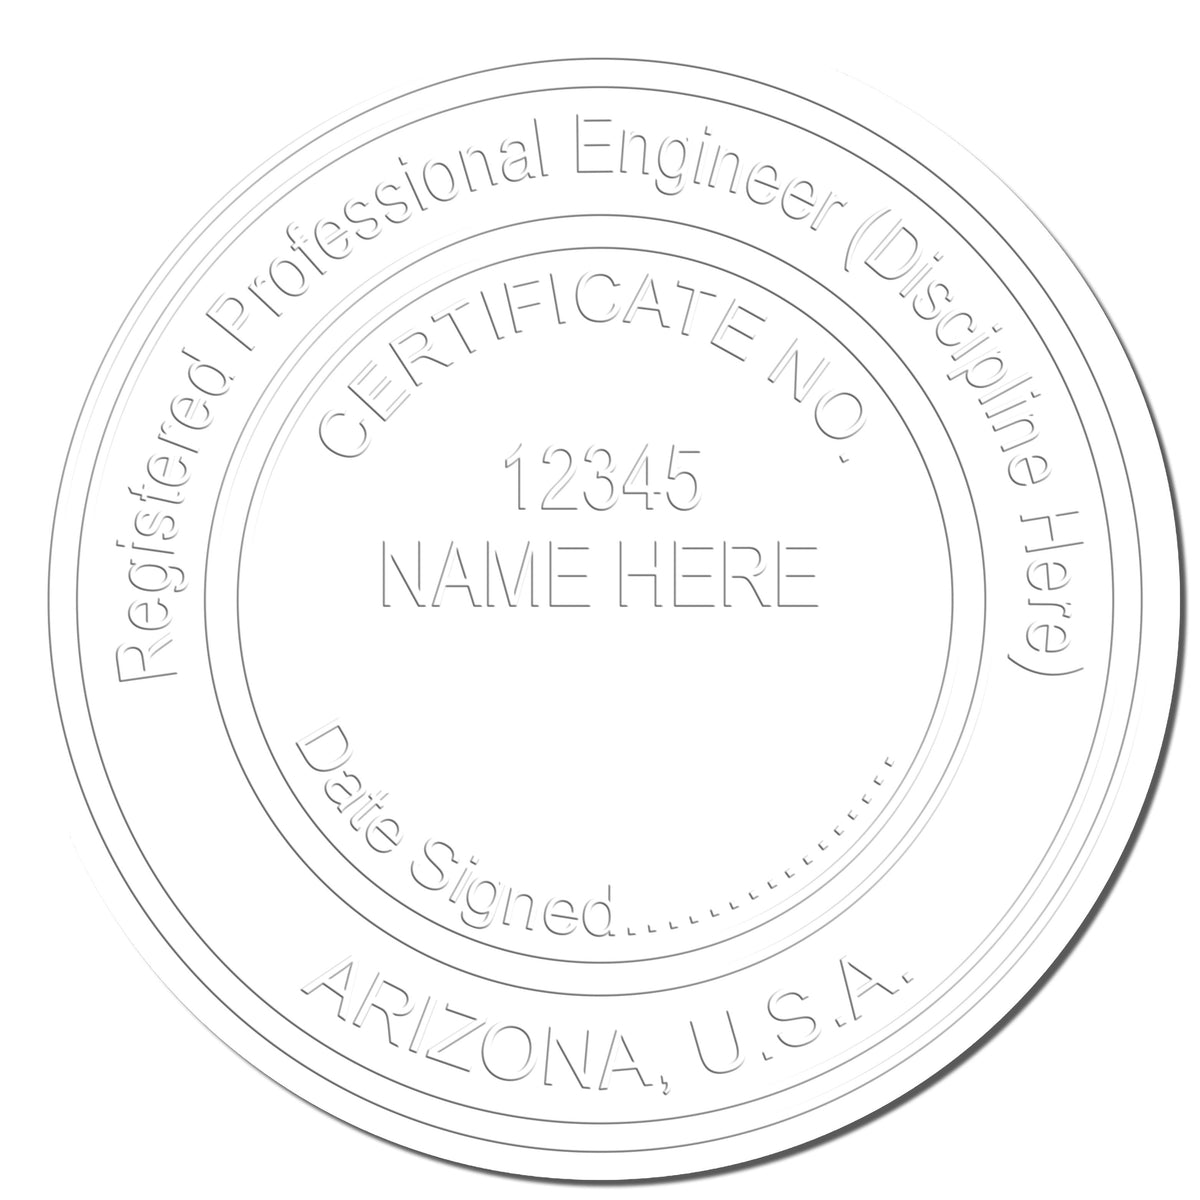 This paper is stamped with a sample imprint of the State of Arizona Extended Long Reach Engineer Seal, signifying its quality and reliability.